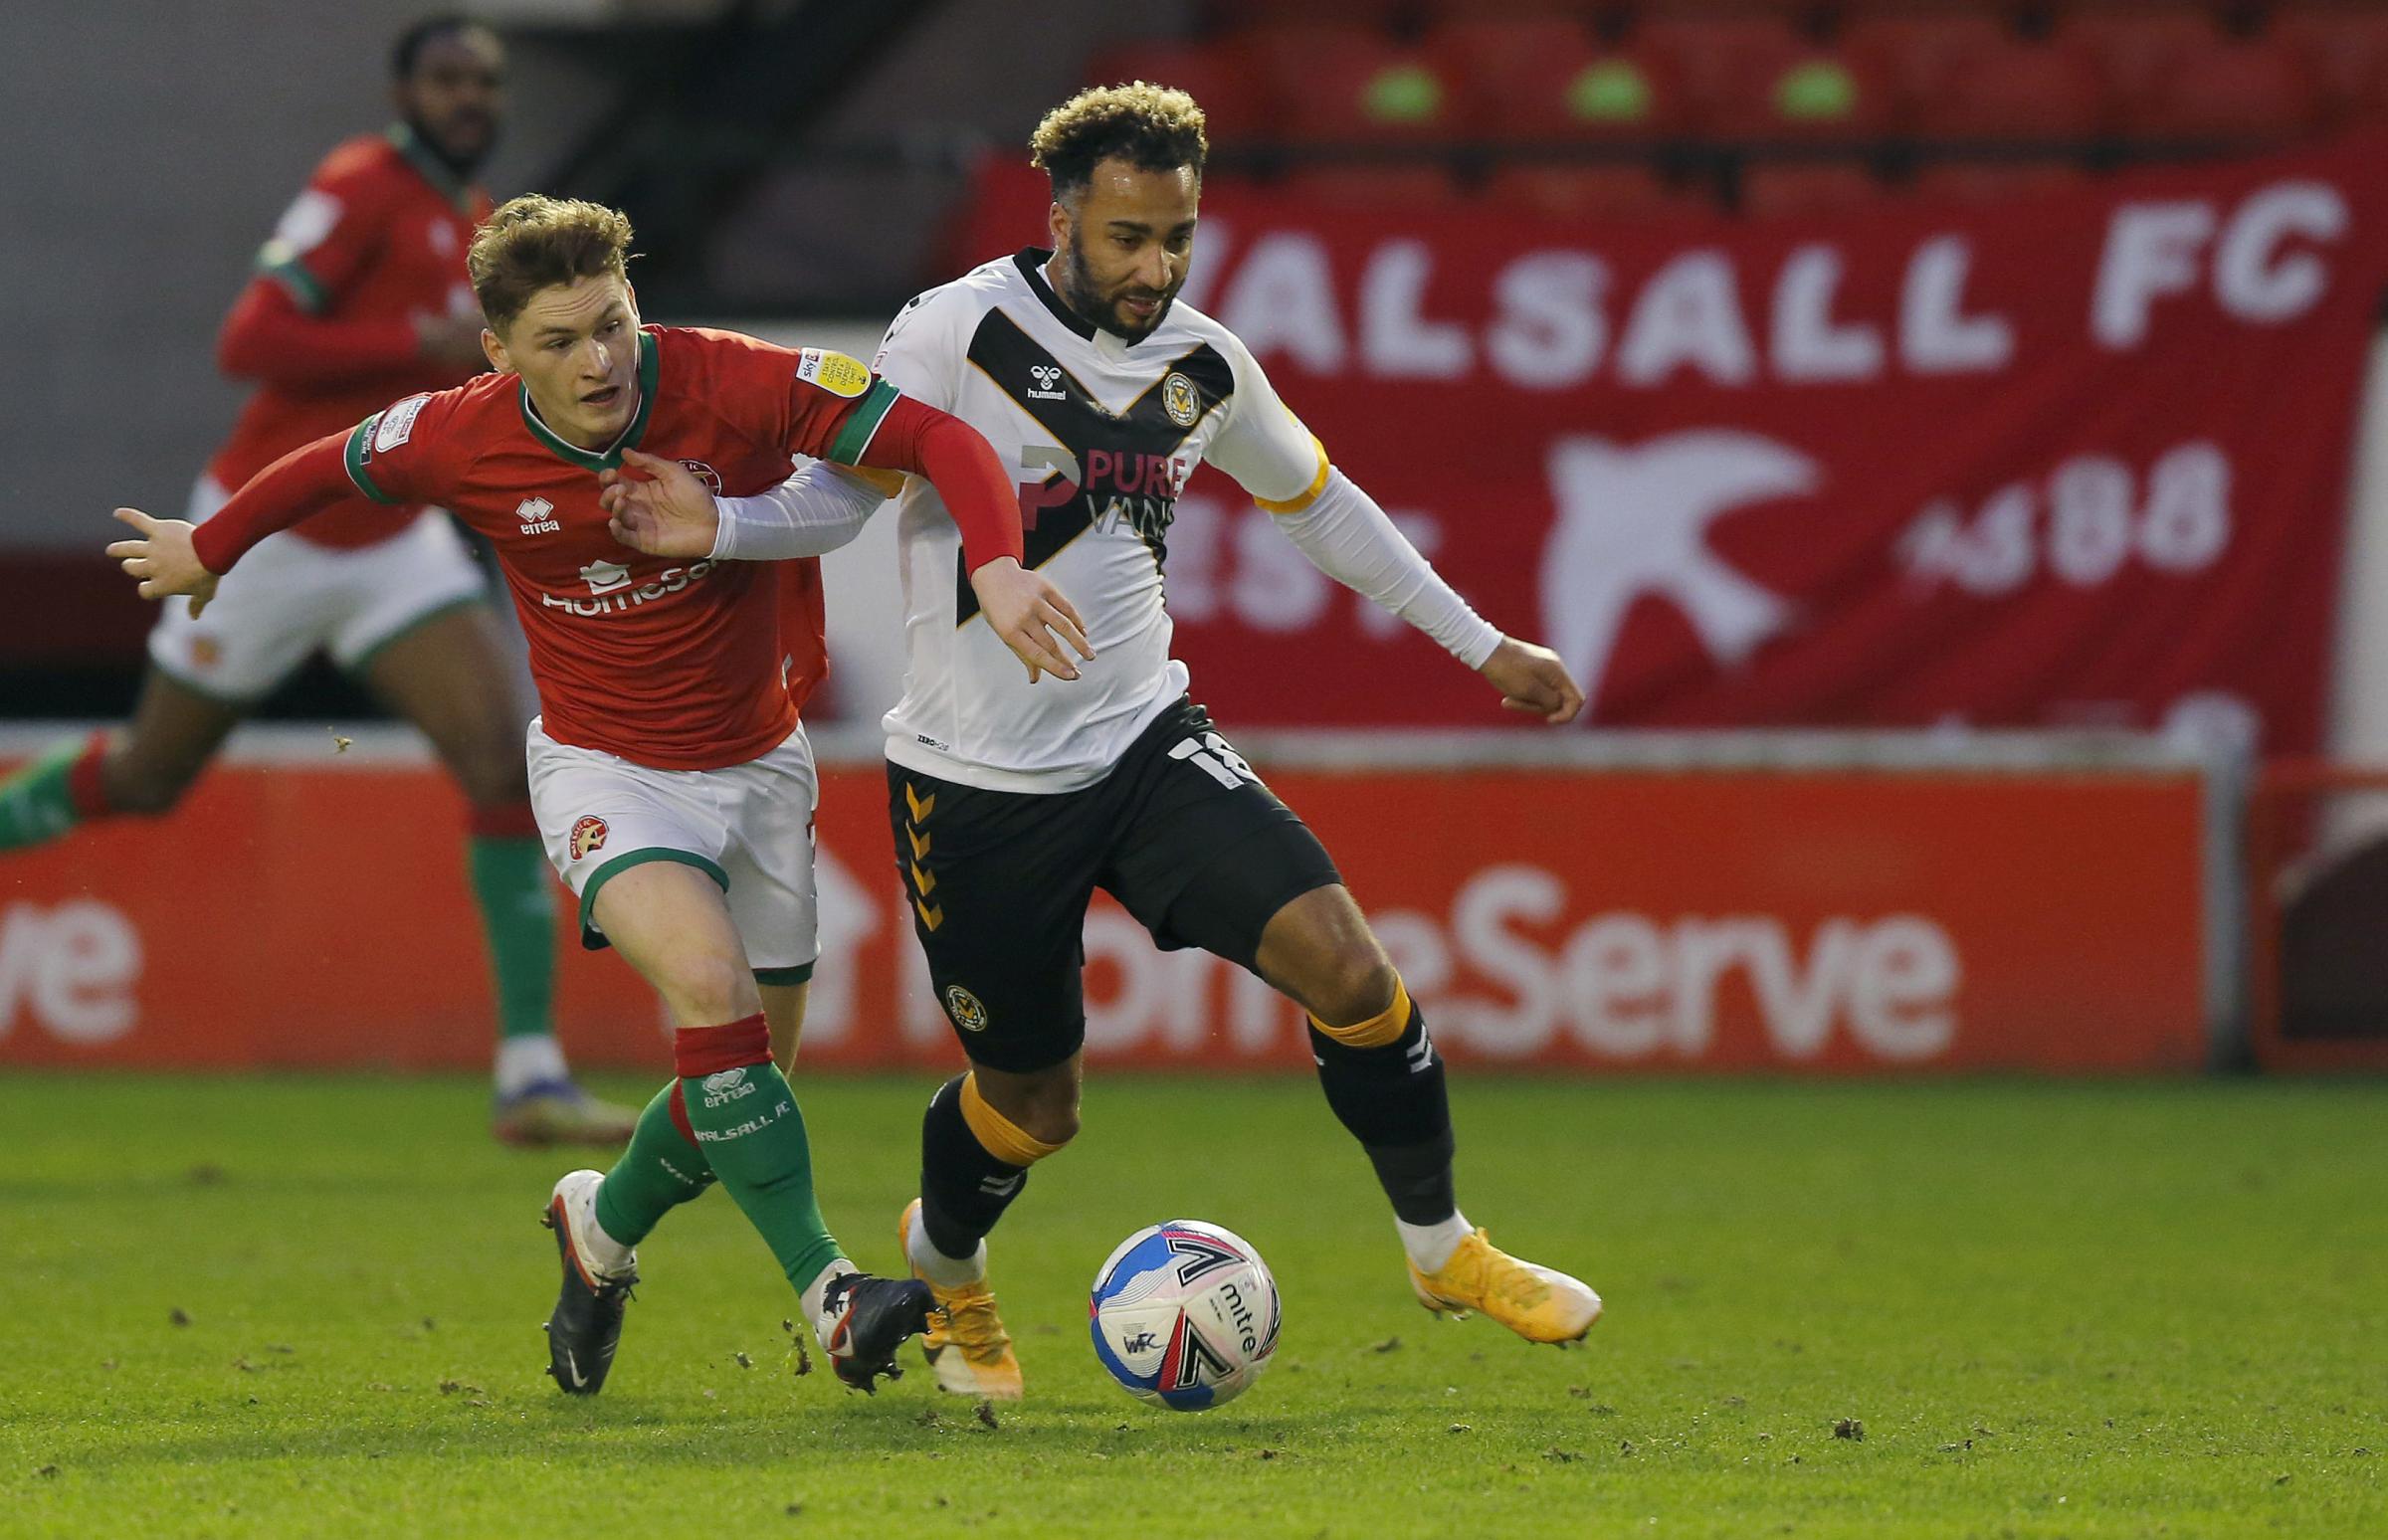 Nicky Maynard on the run. Newport County fared better on the grass in Walsall after the challenging home conditions